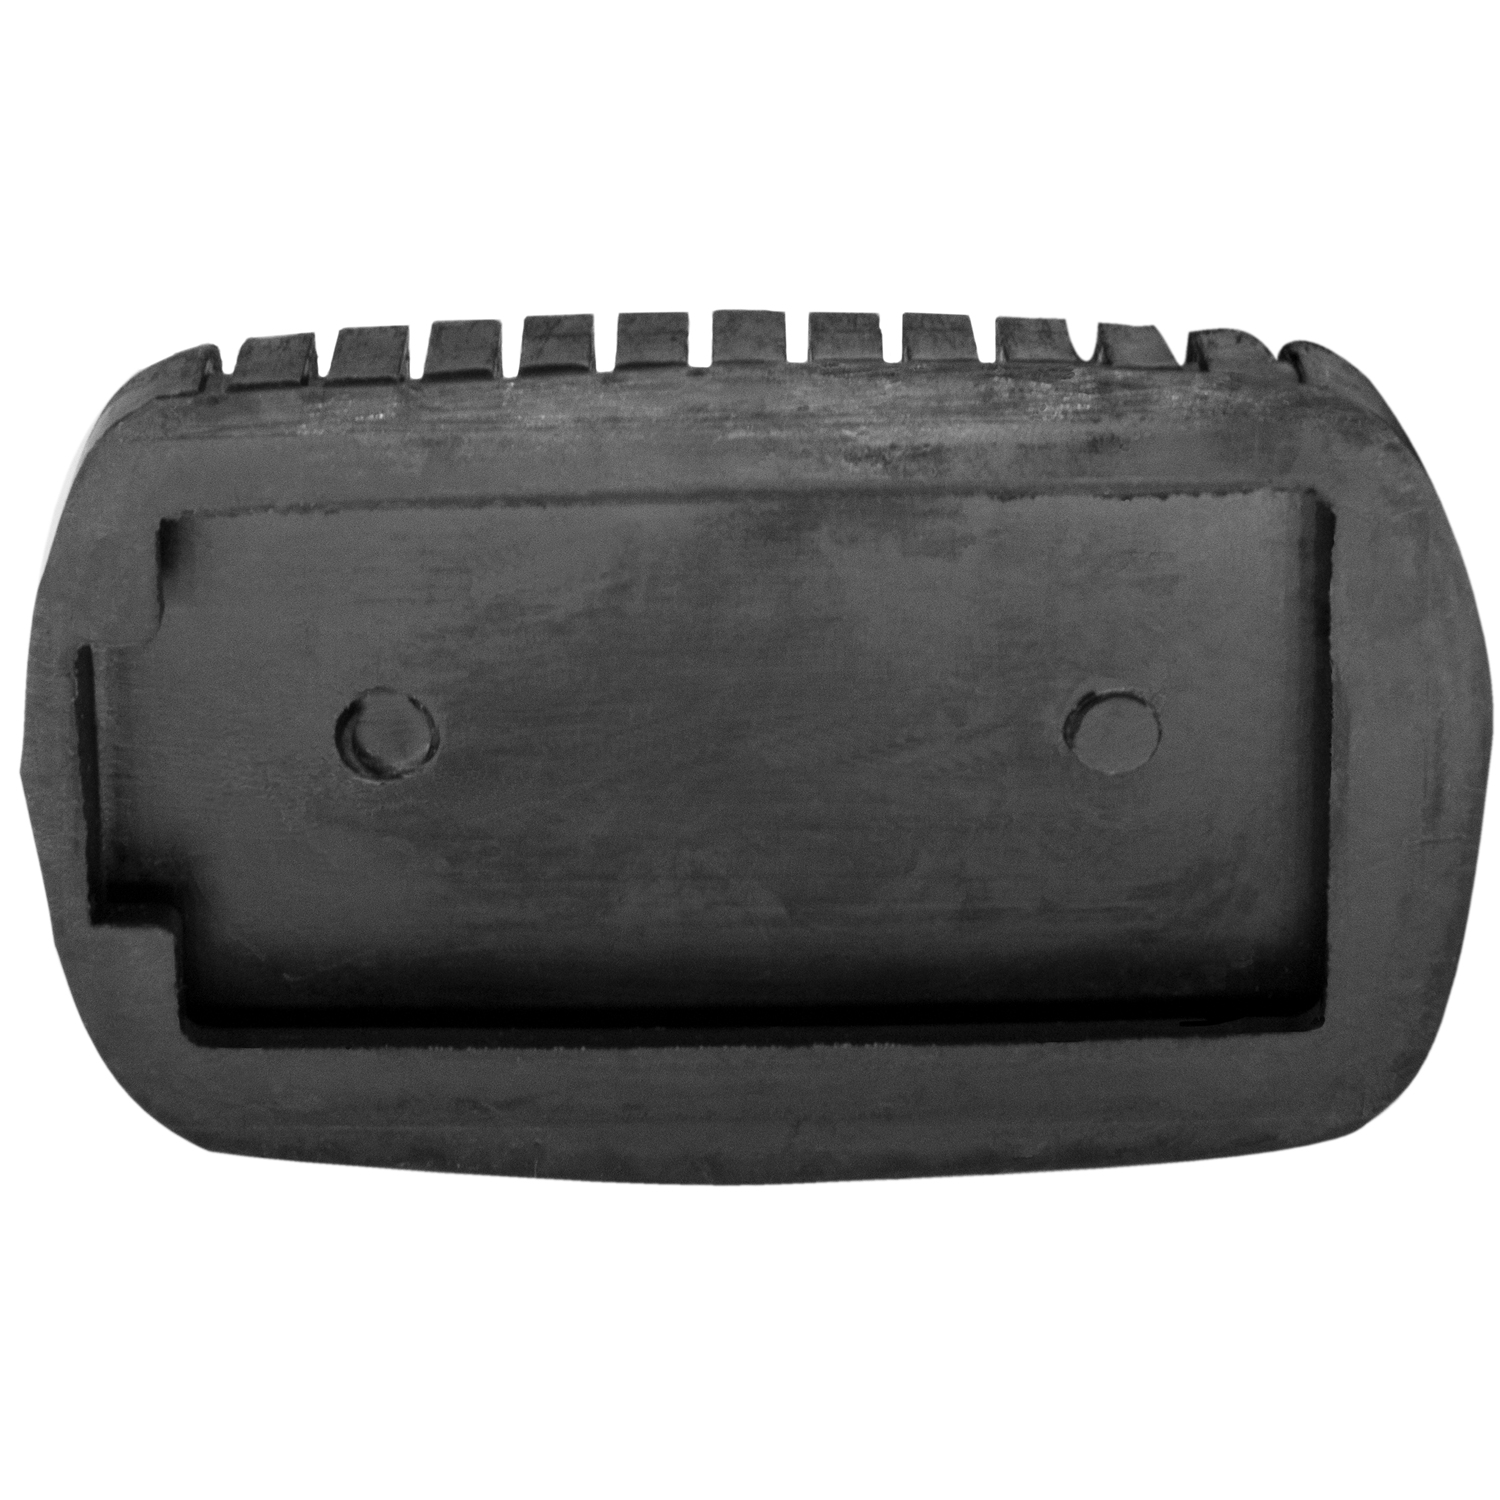 1951 Chevrolet Truck Clutch and Brake Pedal Pad.  2-1/2 wide X 3-7/8 long-CB 100-A/EA